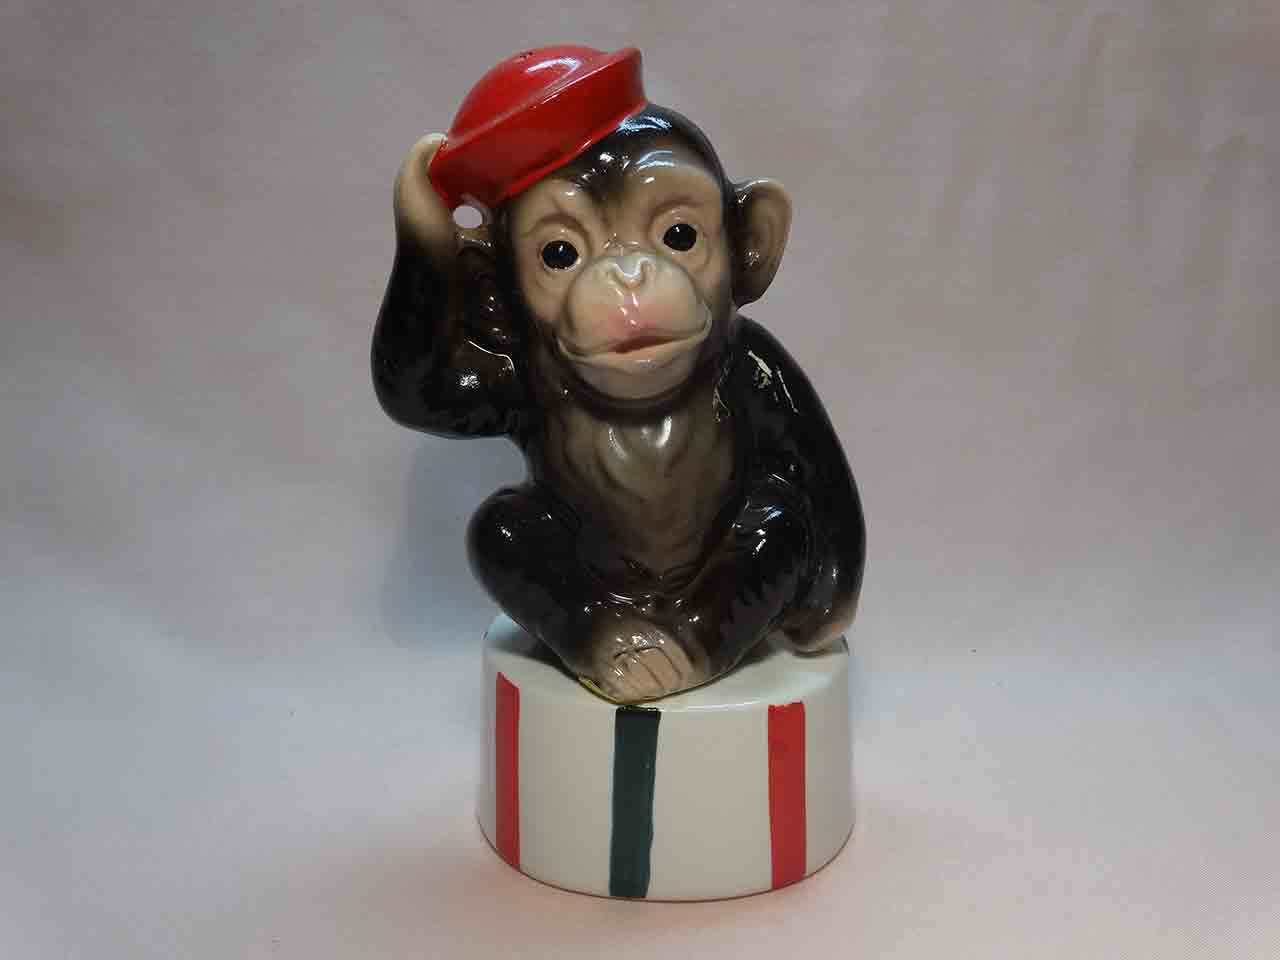 Circus animal on pedestal salt and pepper shakers - monkey